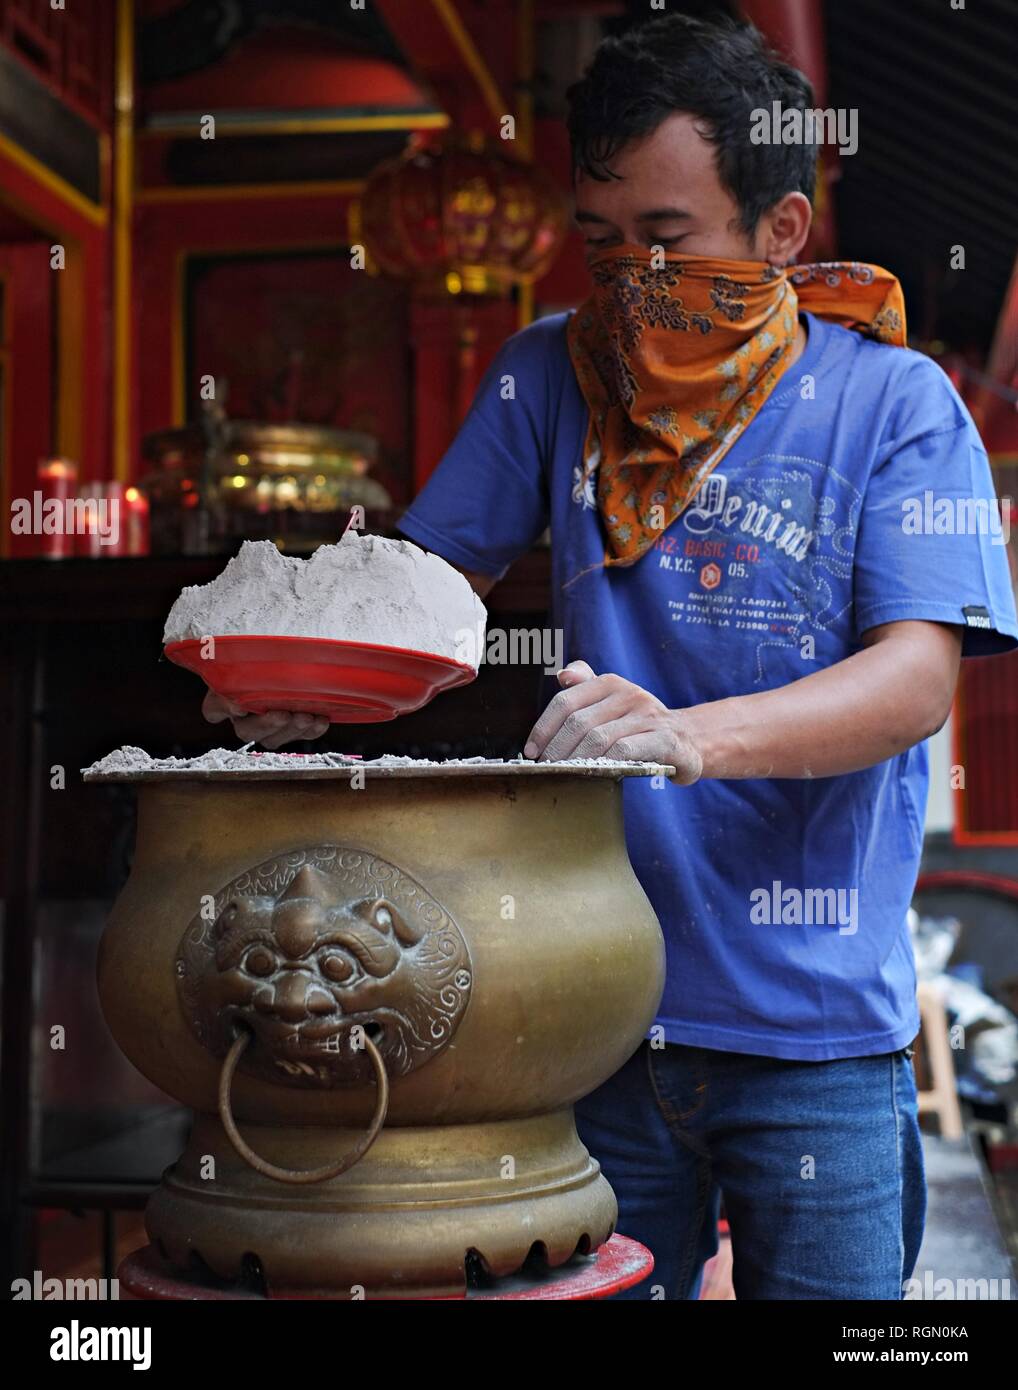 A man is cleaning the incense ashes from a hio-lo in a Buddhist Temple. This yearly tradition before Chinese New Year is called Ayak Abu ritual. Stock Photo